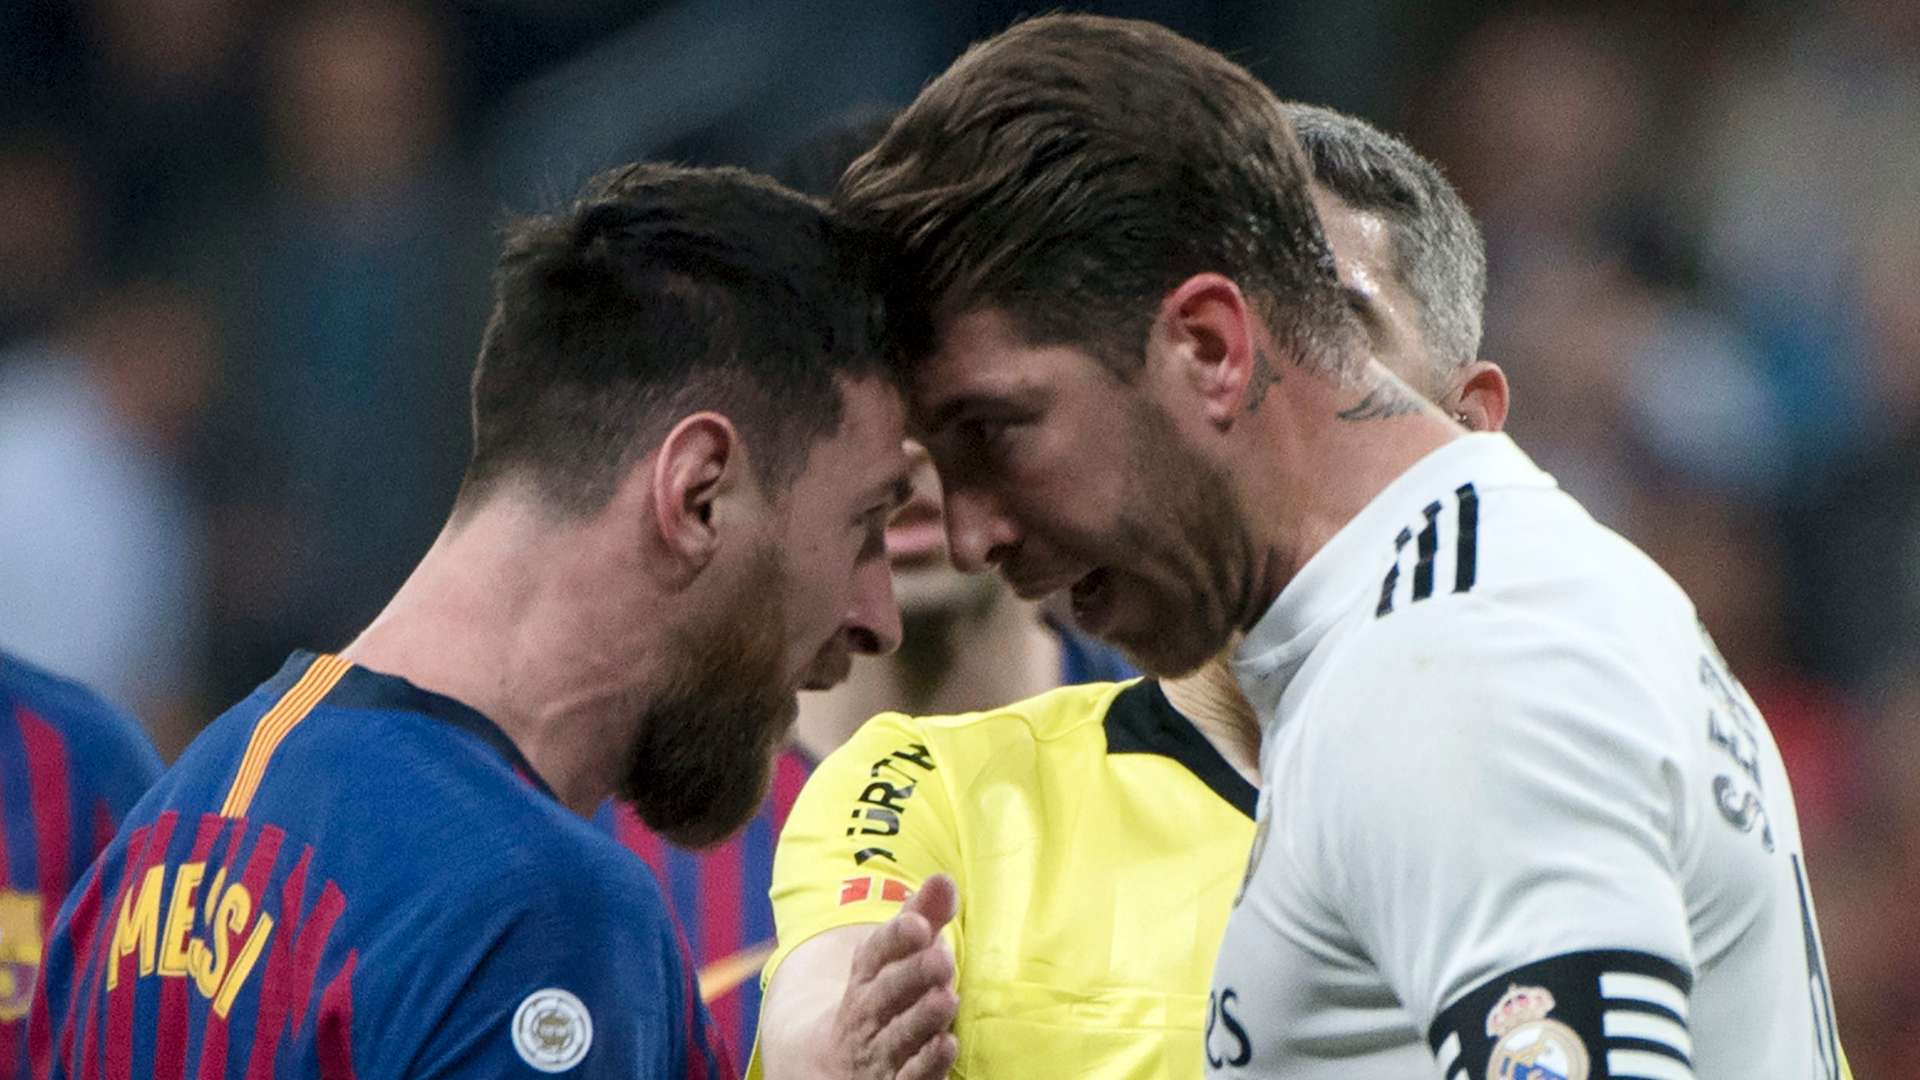 Revealed: Lionel Messi names rival that made him 'most angry' – with it no surprise to find that Real Madrid opponent annoyed Inter Miami's former Barcelona superstar | Goal.com English Saudi Arabia